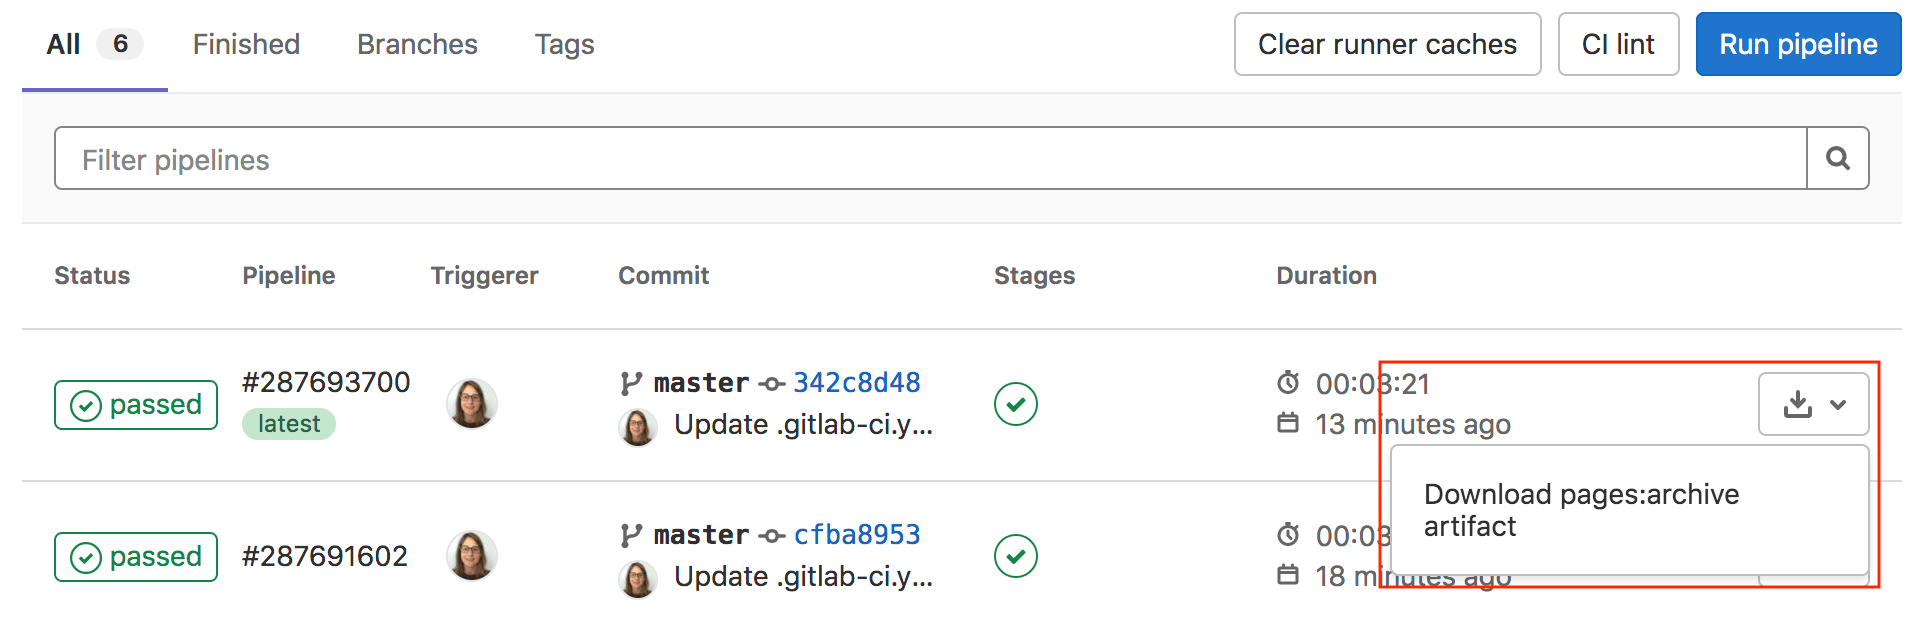 Job artifacts in Pipelines page